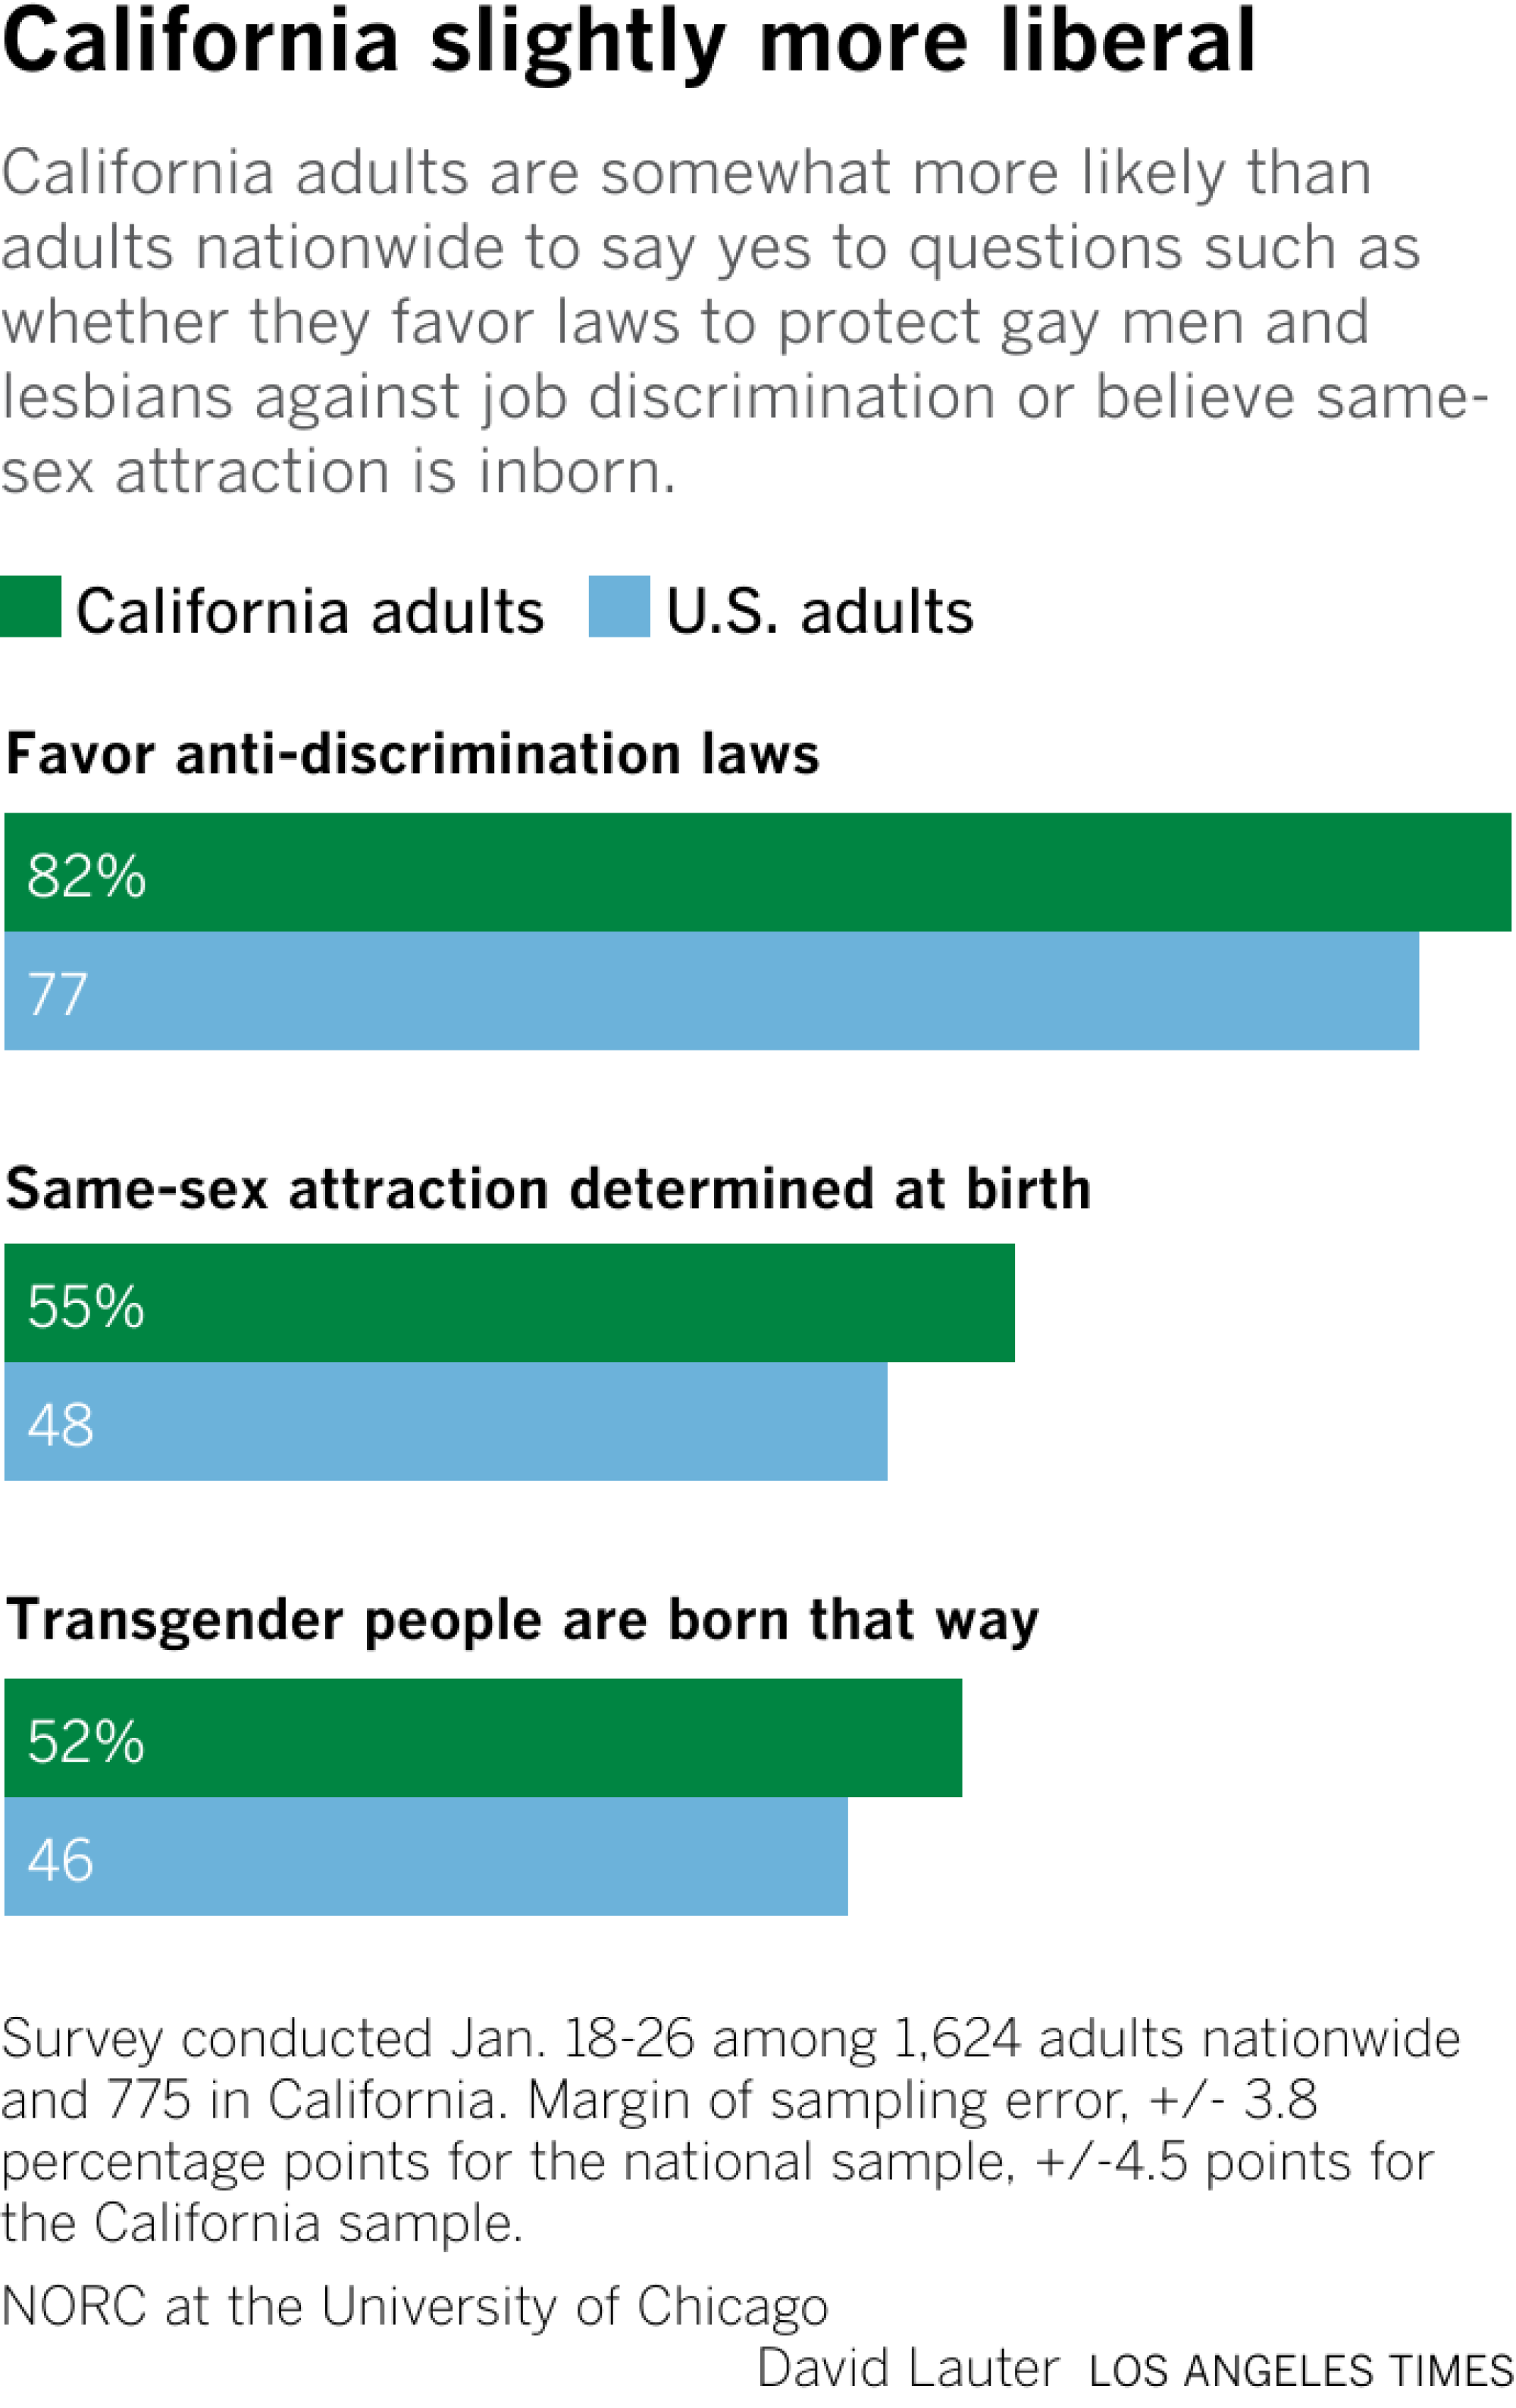 Bar chart shows the share of California adults and adults nationwide who say yes to three questions about LGBTQ+ issues.